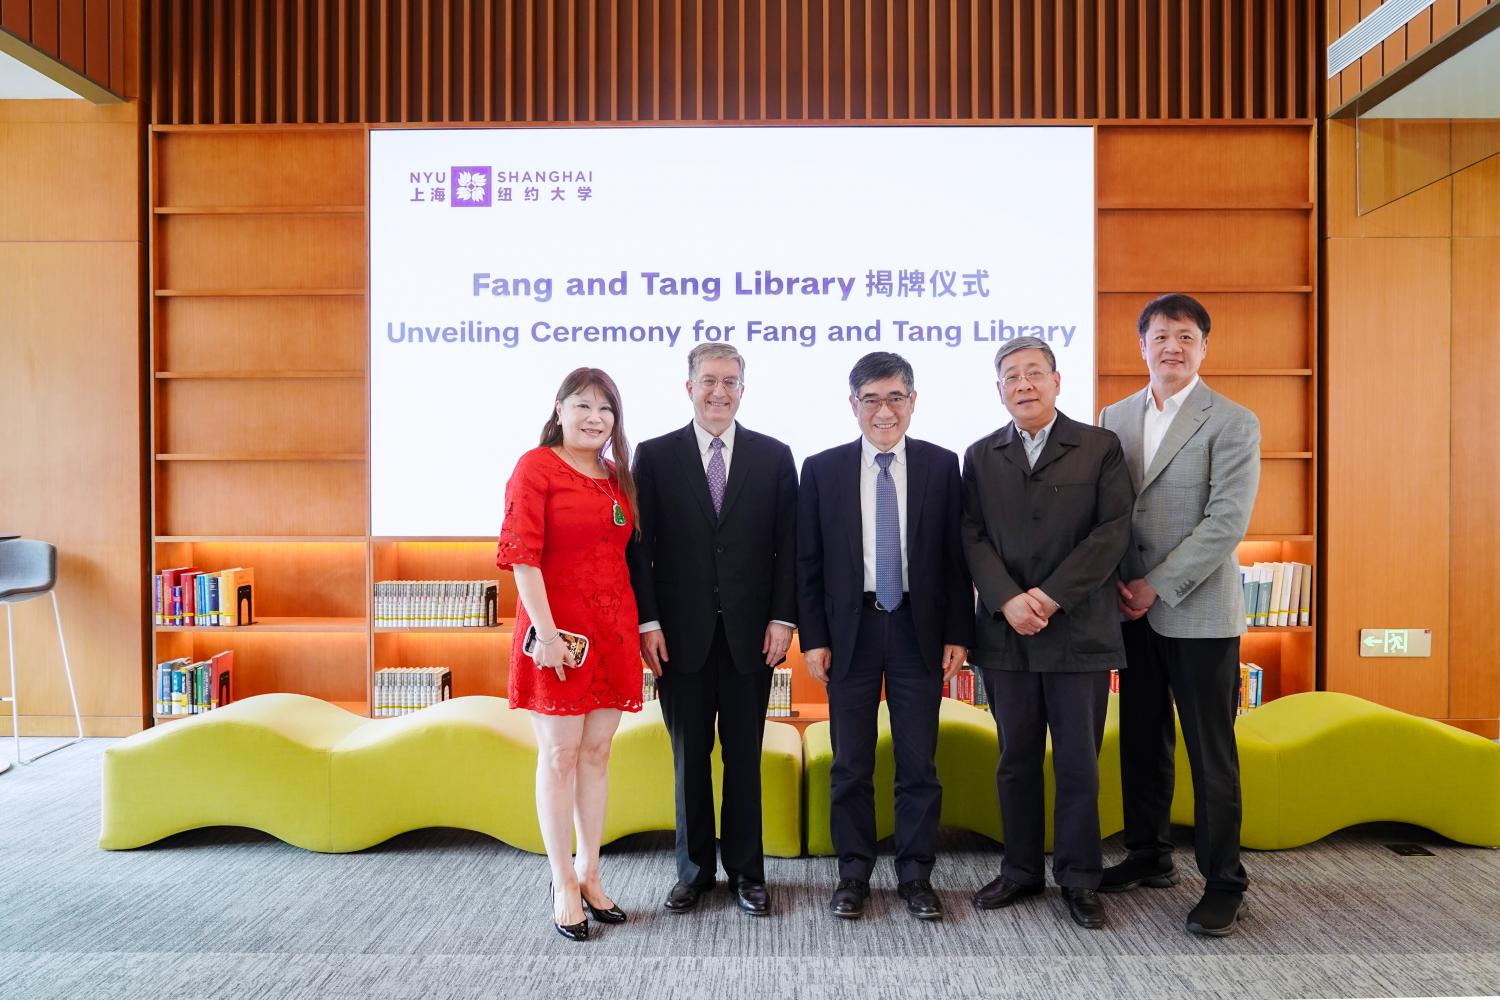 From Left to right: Charlene Tang, Jeffrey Lehman, Tong Shijun, Wenhui Li (Vice President of the Association for Relations Across the Taiwan Straits), Edward J. Fang